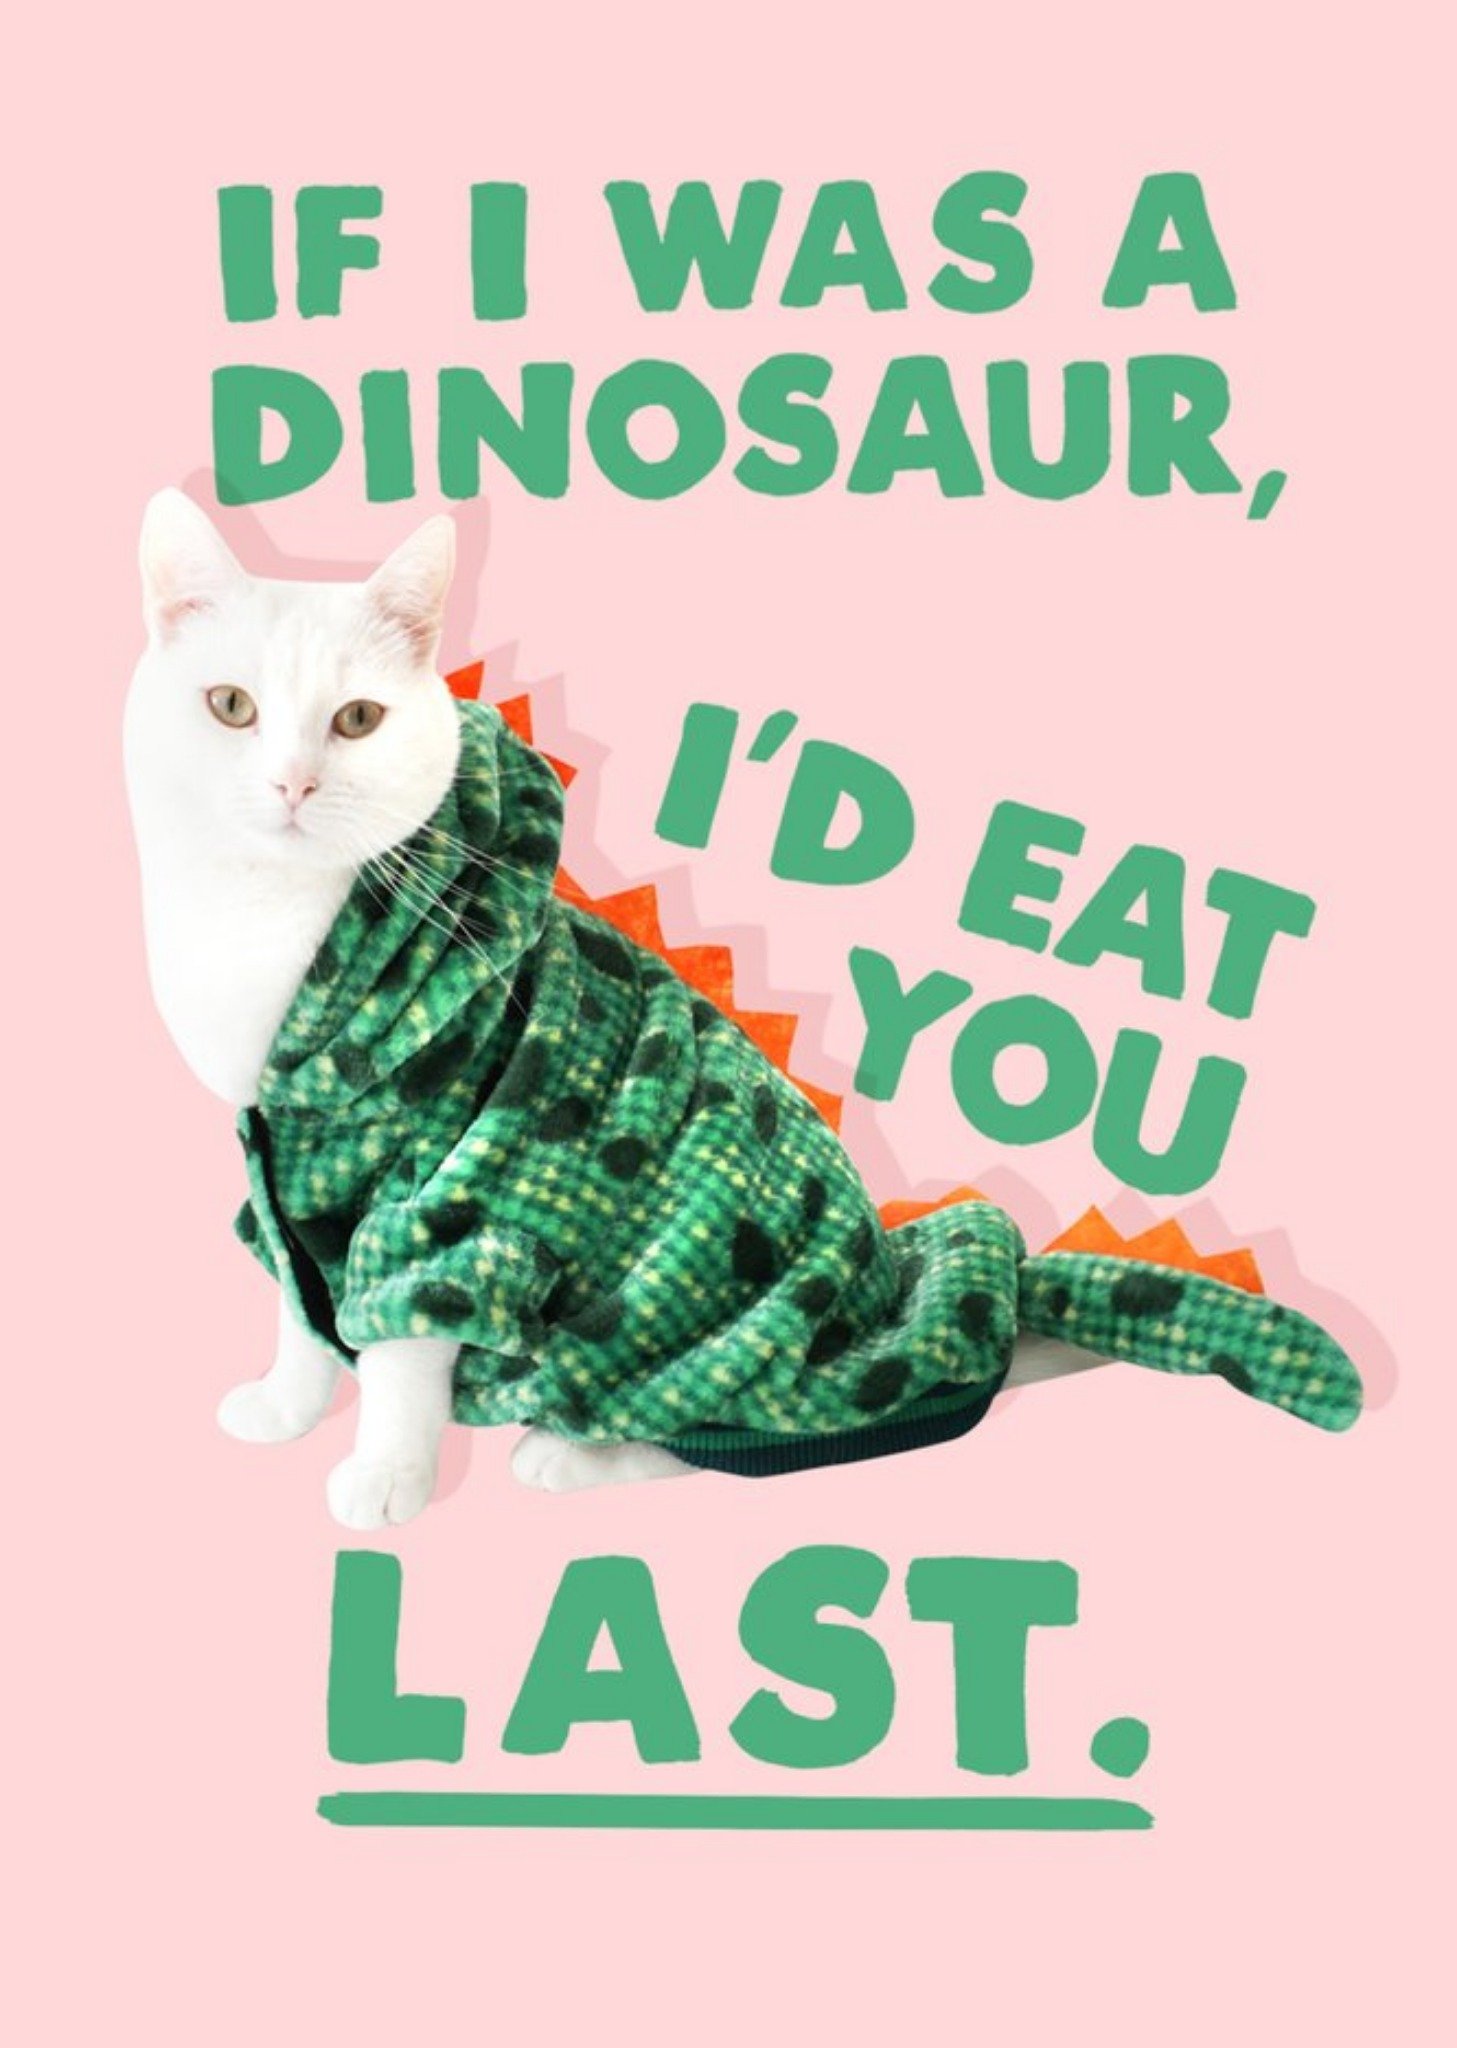 Jolly Awesome If I Were A Dinosaur I'd Eat You Last Card Ecard